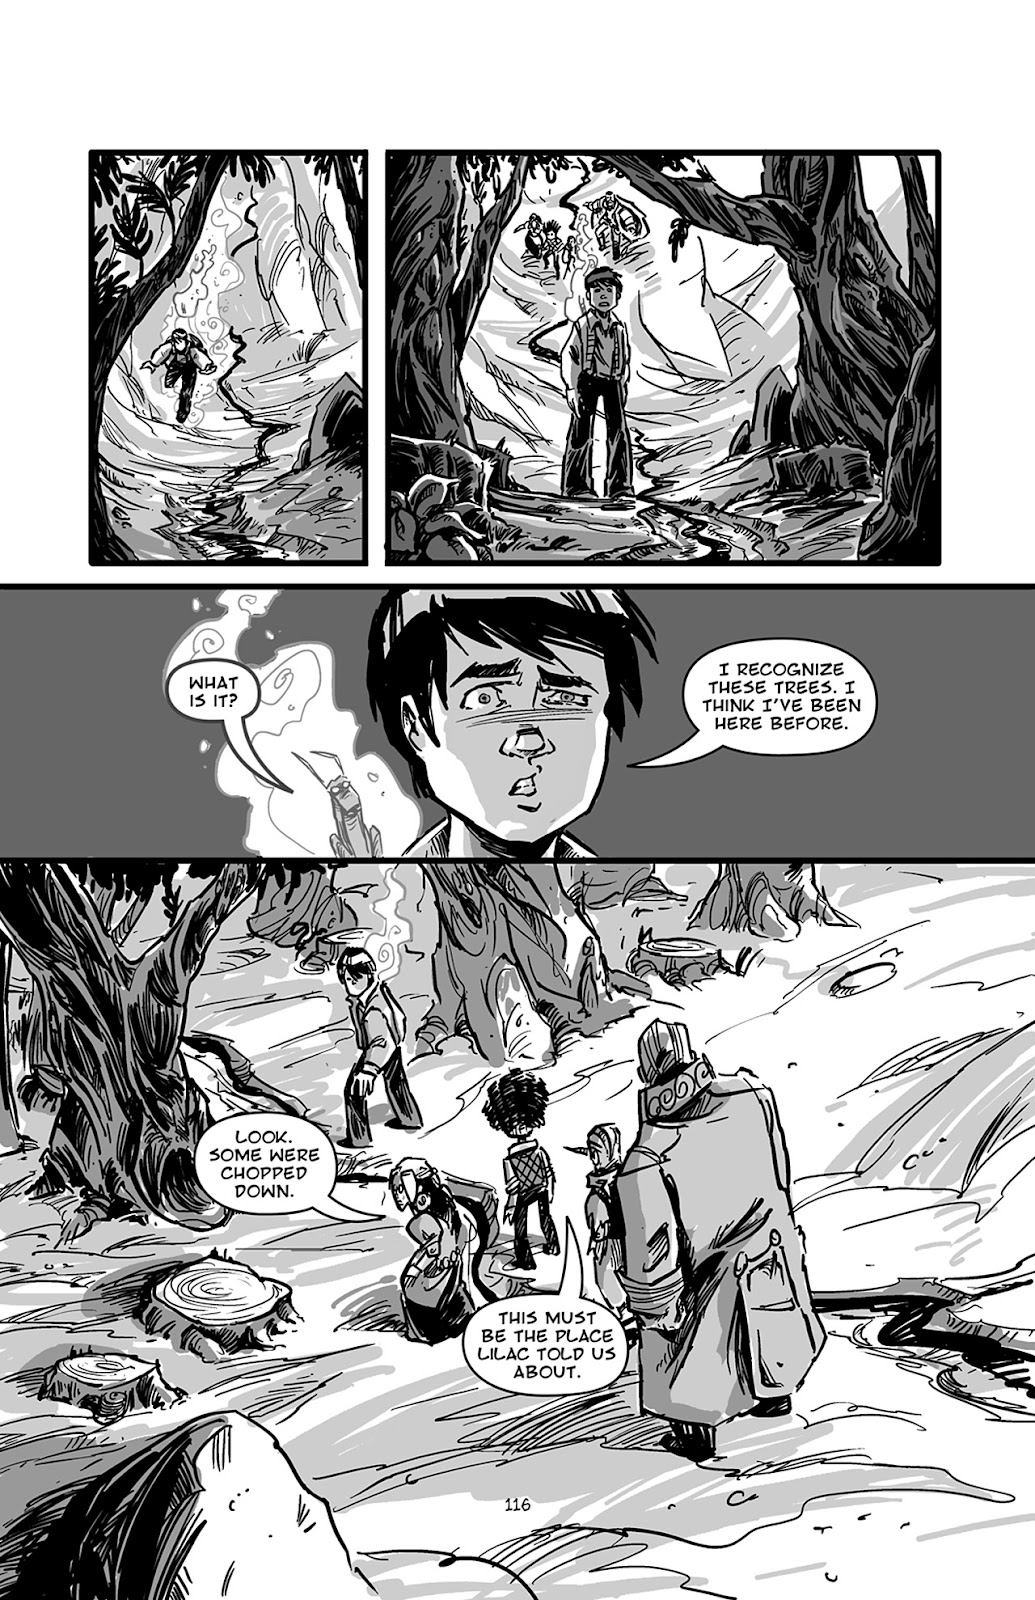 Pinocchio: Vampire Slayer - Of Wood and Blood issue 5 - Page 17